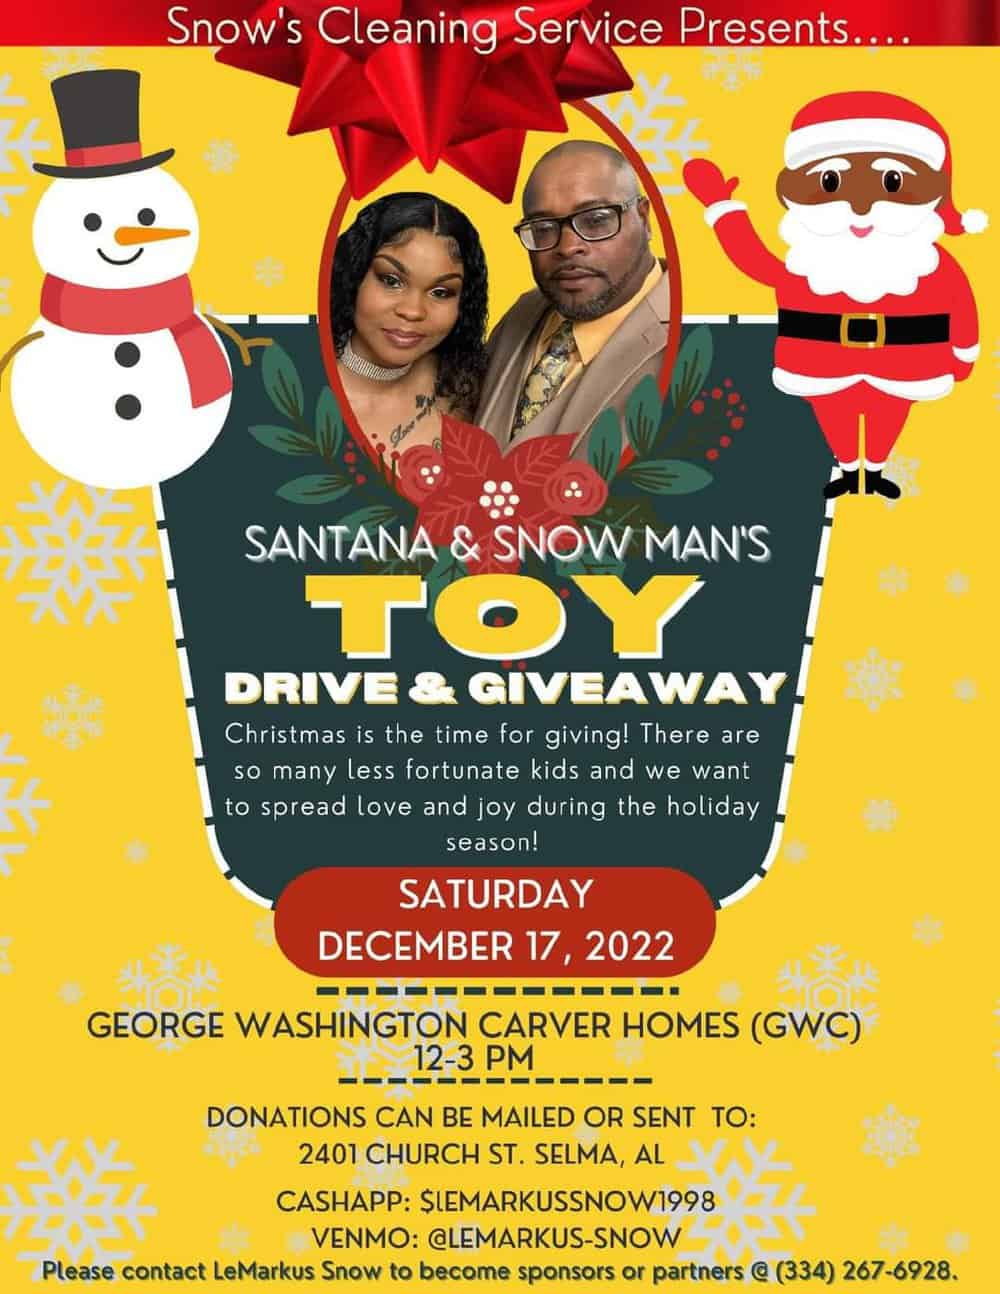 Snow Cleaning Service Toy Drive and Giveaway